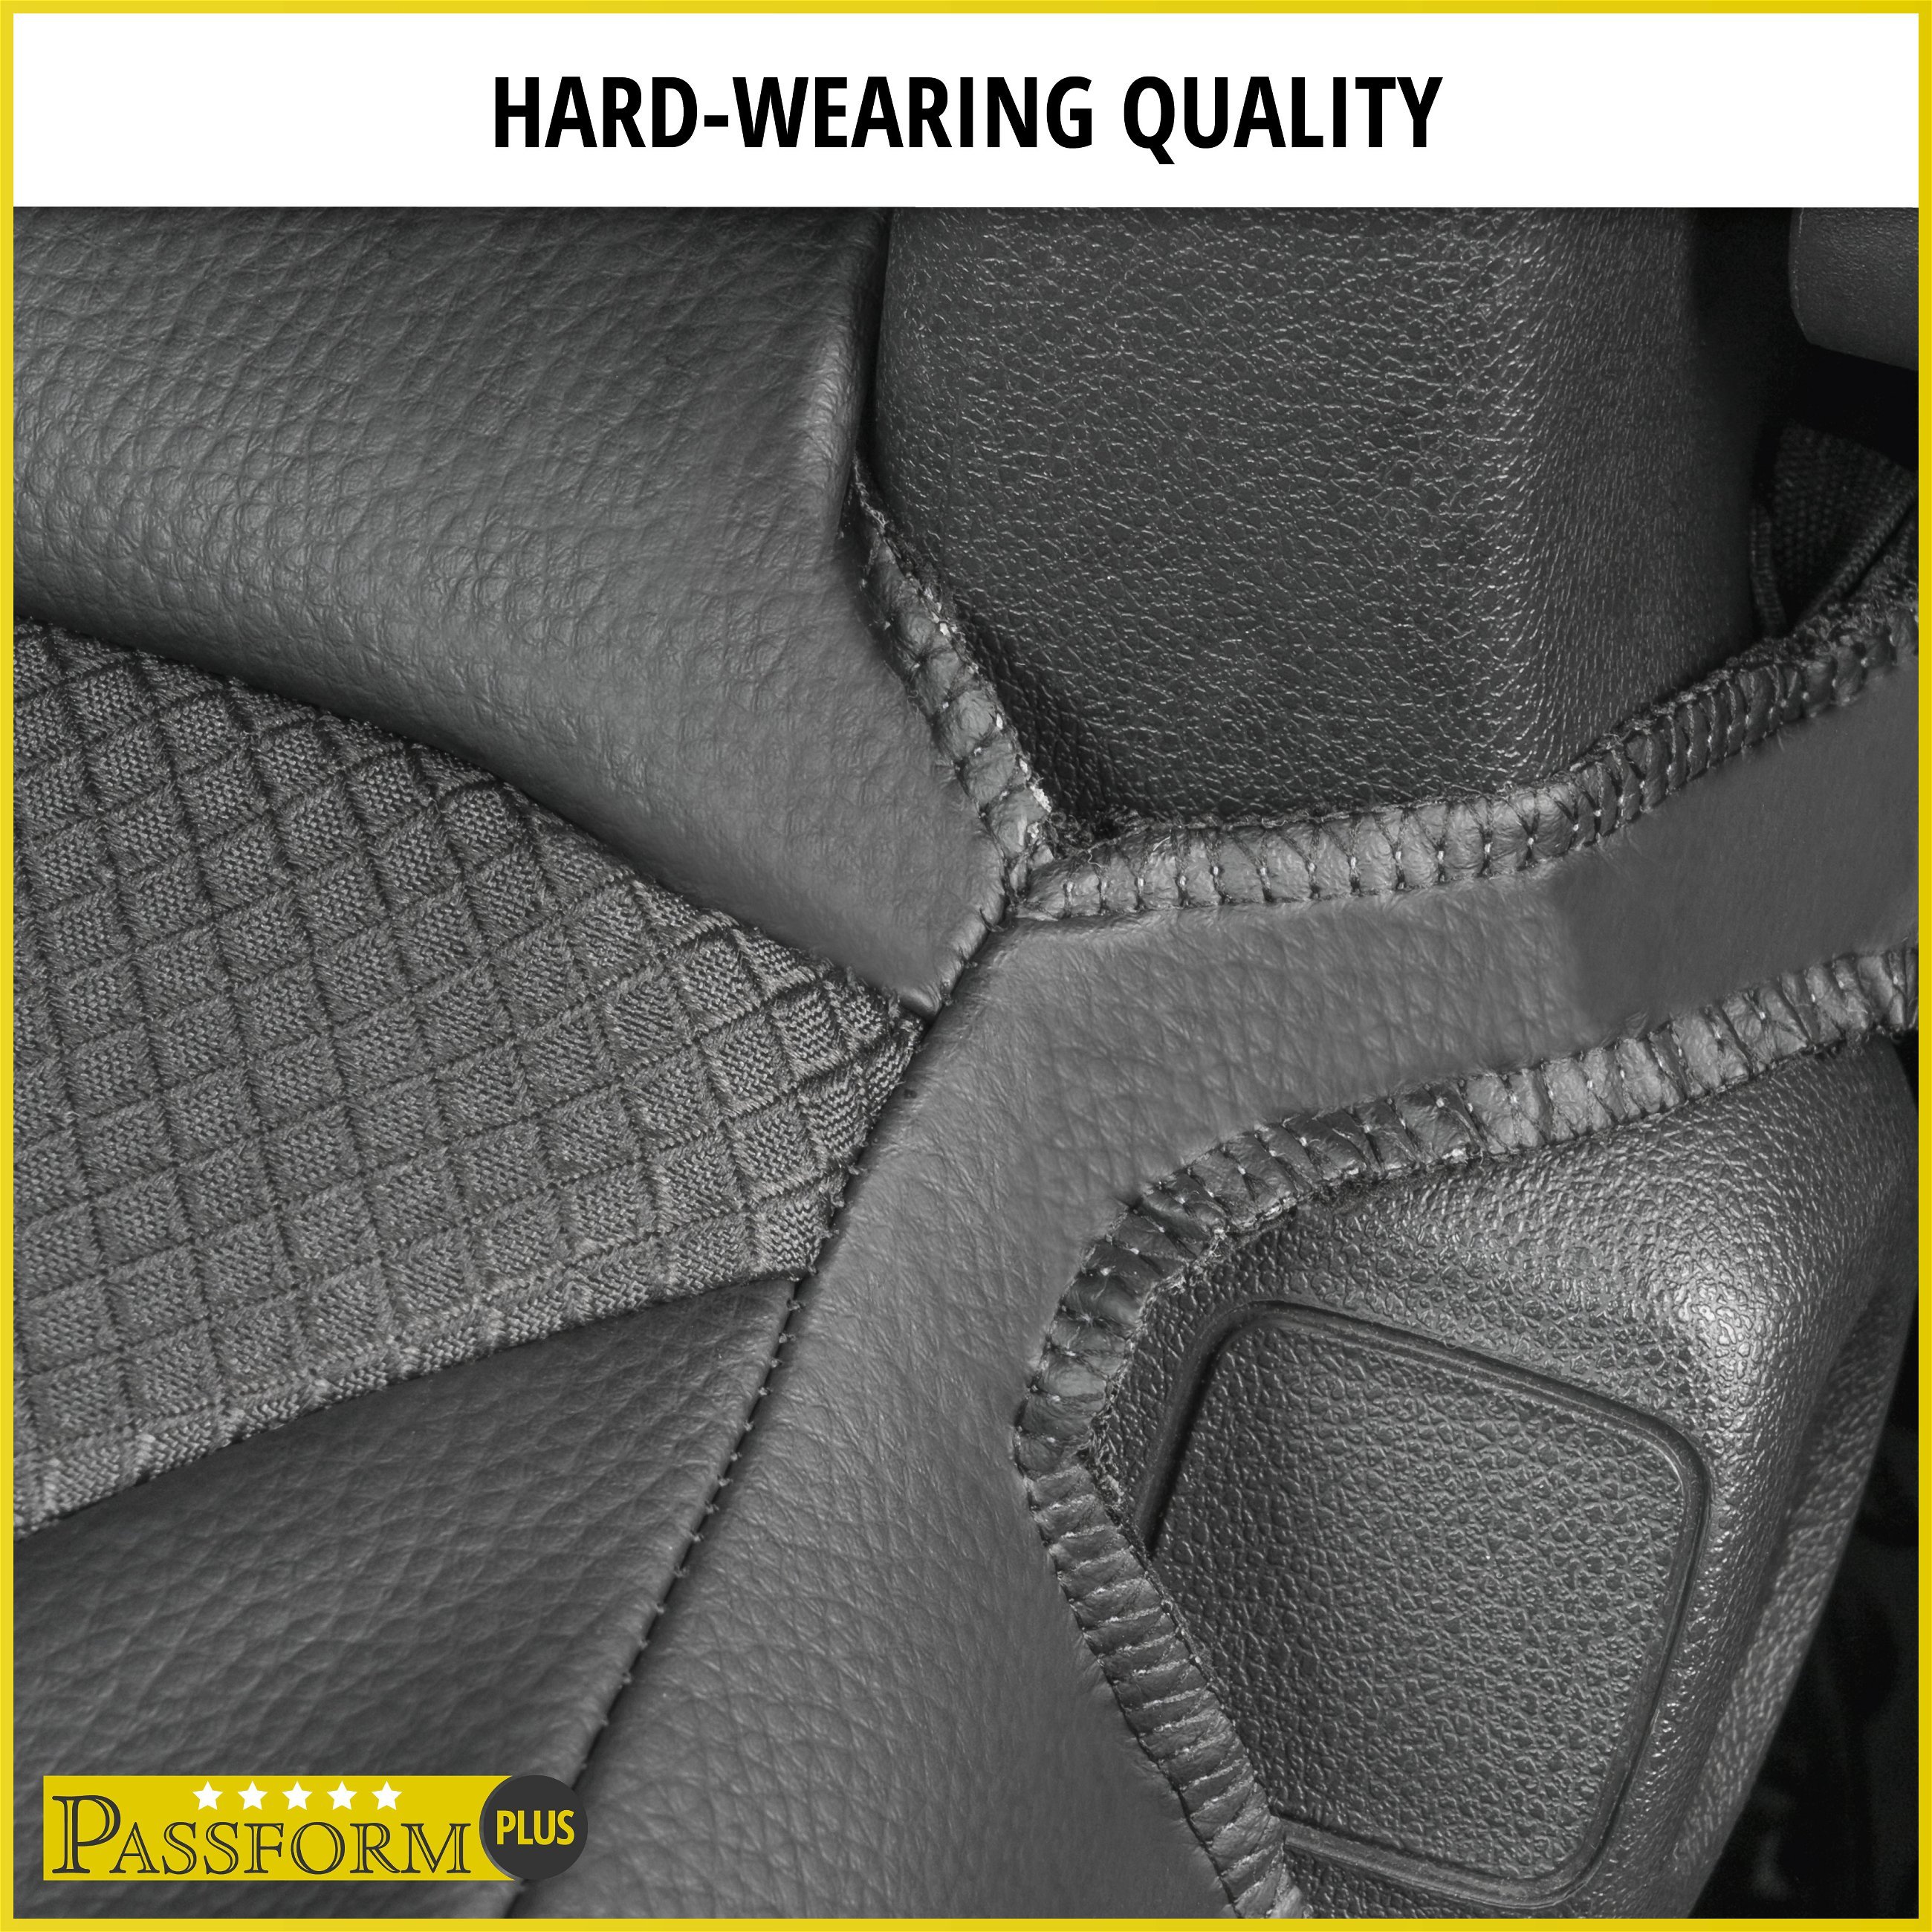 Premium Seat Cover for Citroen Jumpy III 2016-Today, 2 single seat covers front + 2 armrest covers